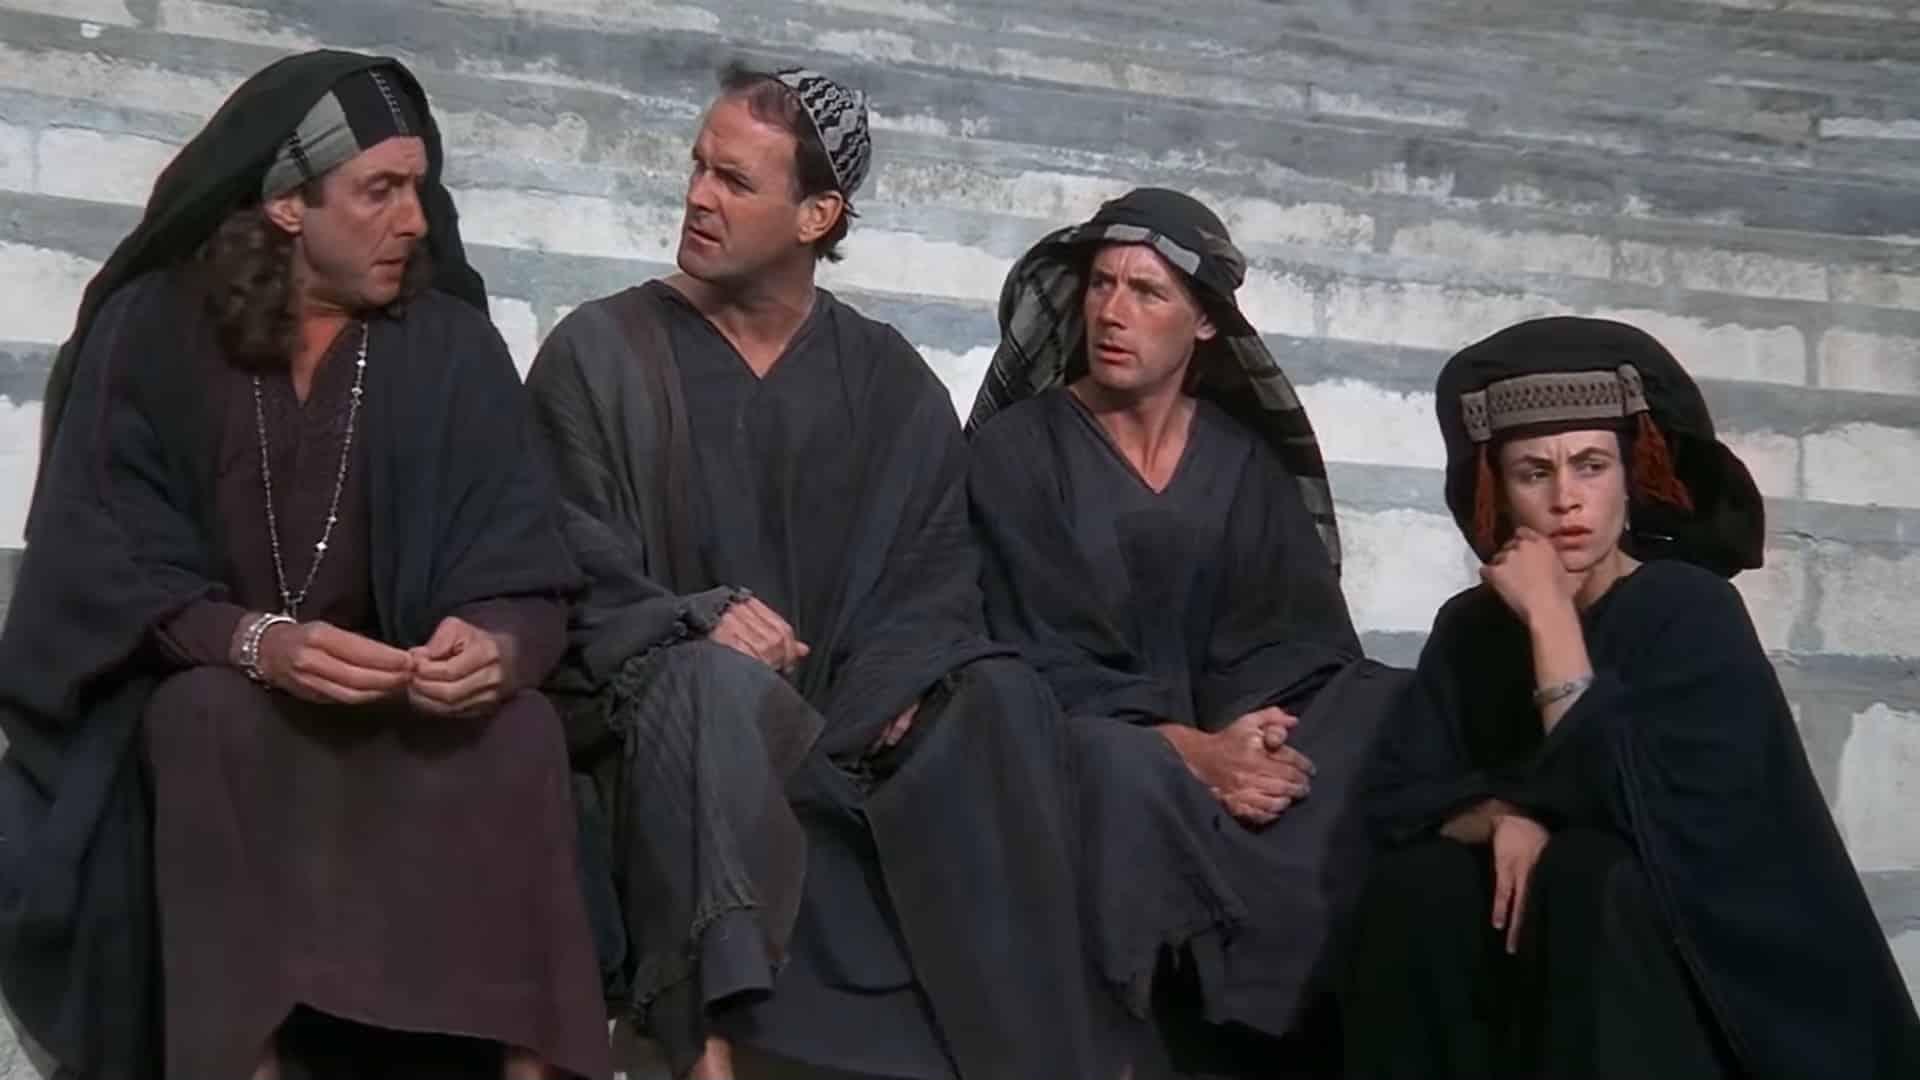 John Cleese assures that he will not censor ‘The Life of Brian’ in its theatrical version